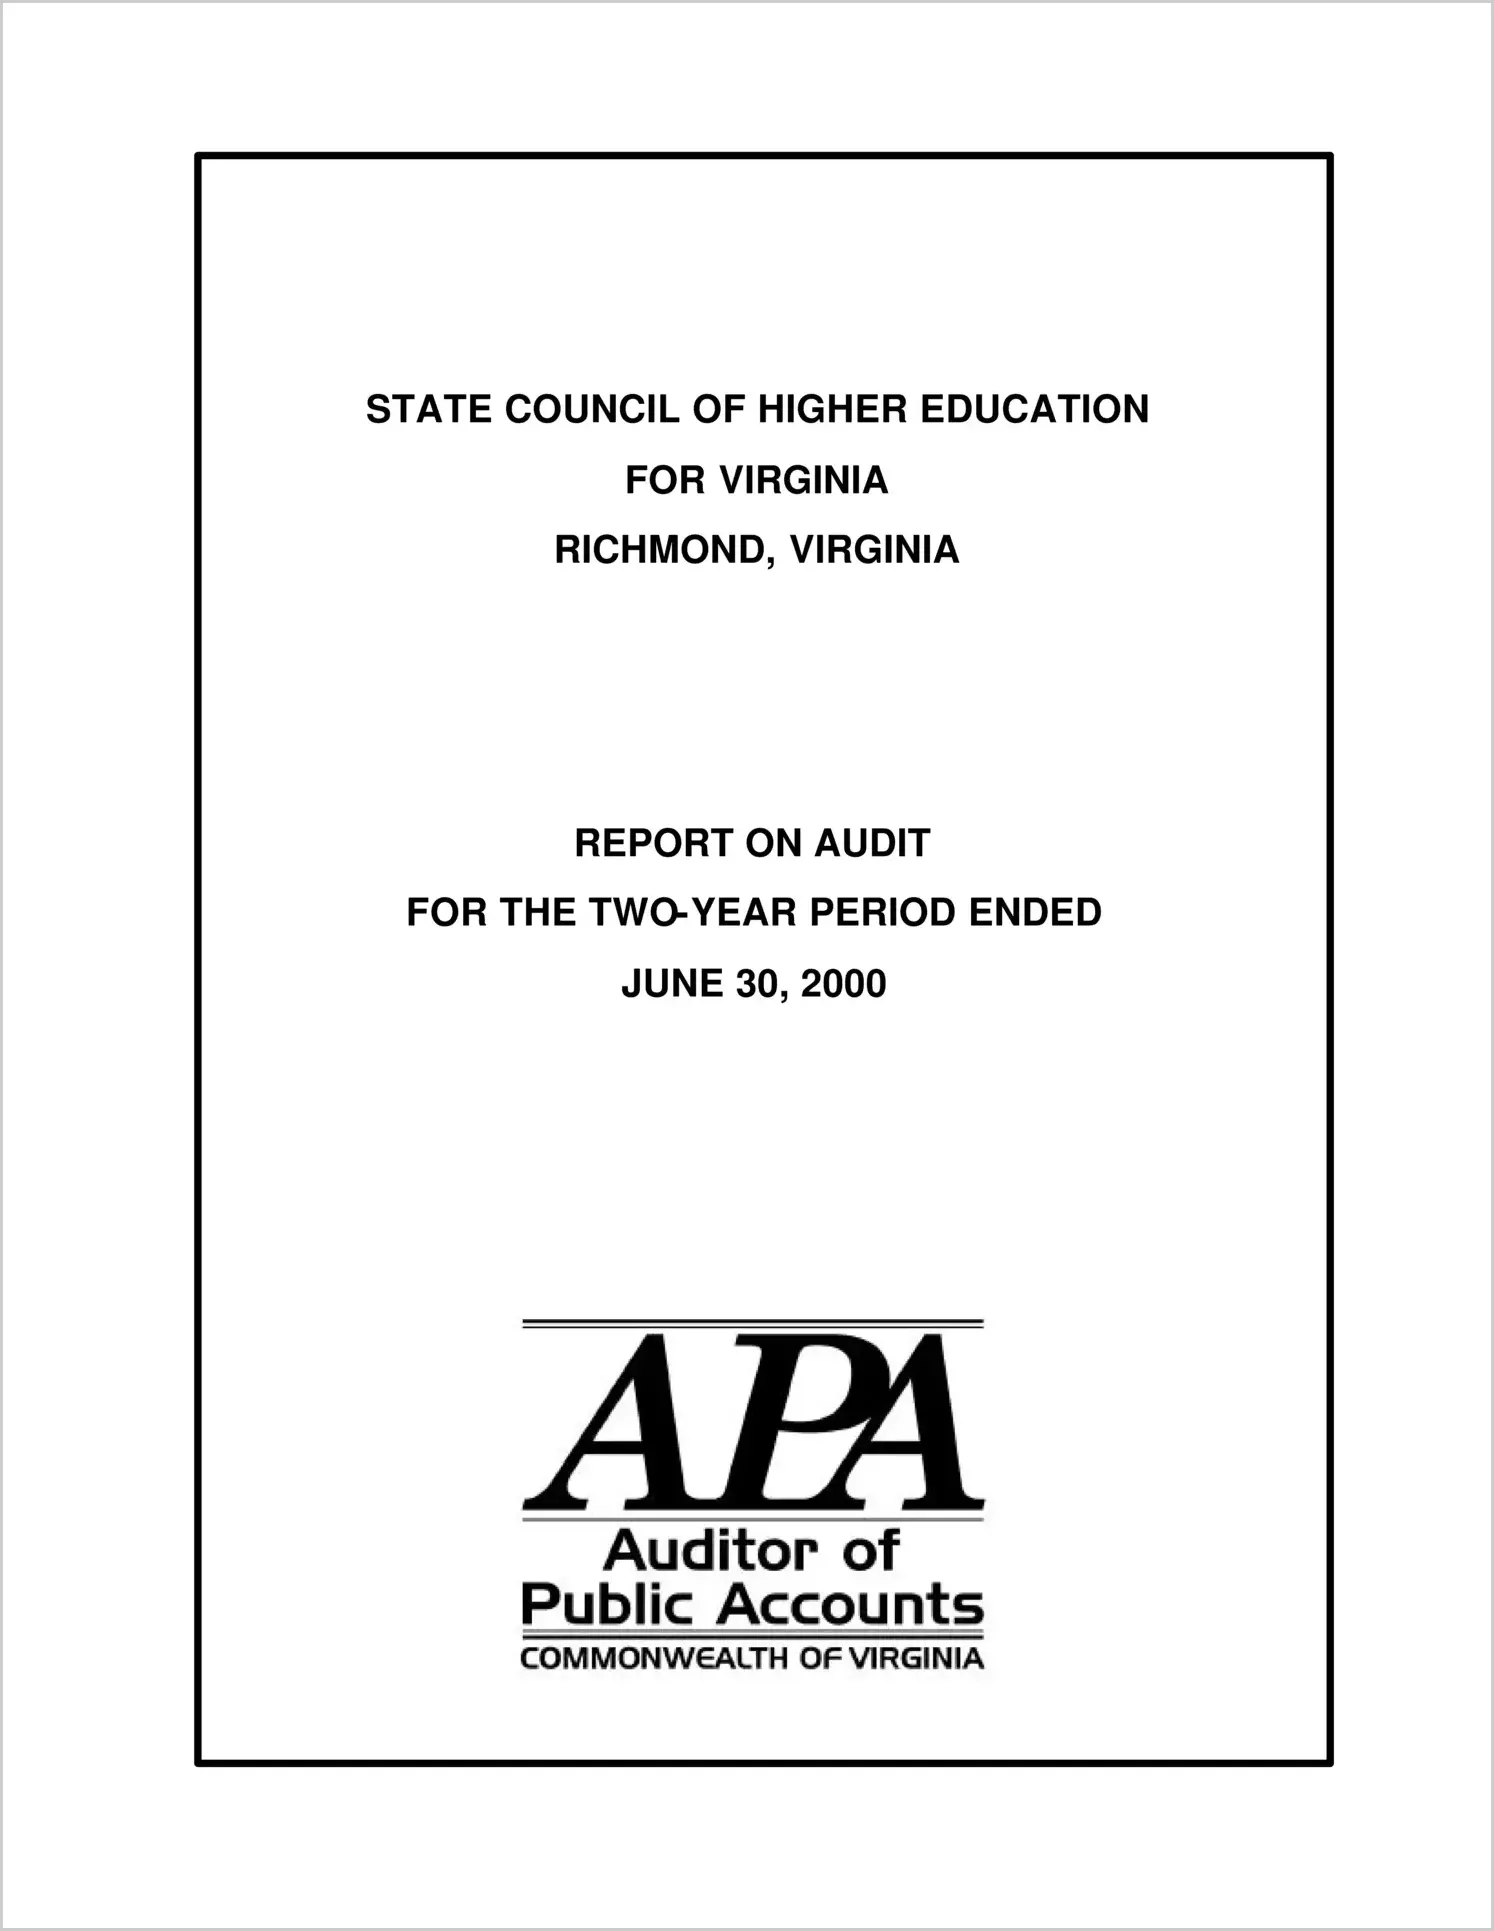 State Council of Higher Education for Virginia for the two-year period ended June 30, 2000